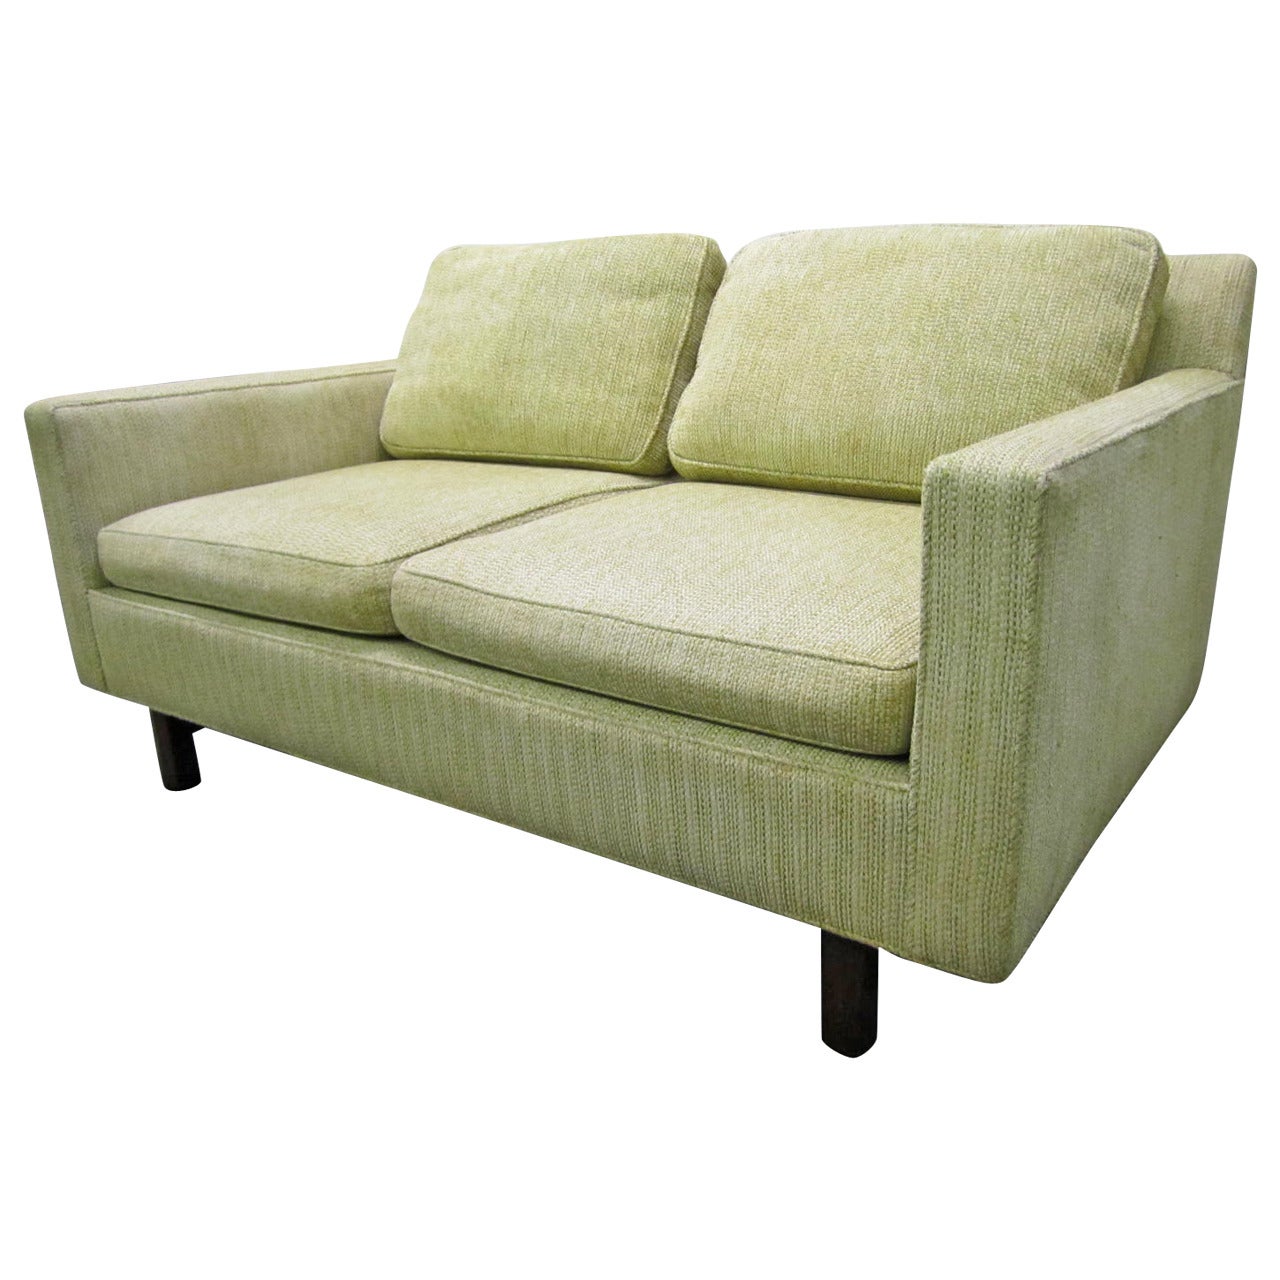 Mid-Century Modern Two-Seater Loveseat Sofa by Edward Wormley for Dunbar For Sale